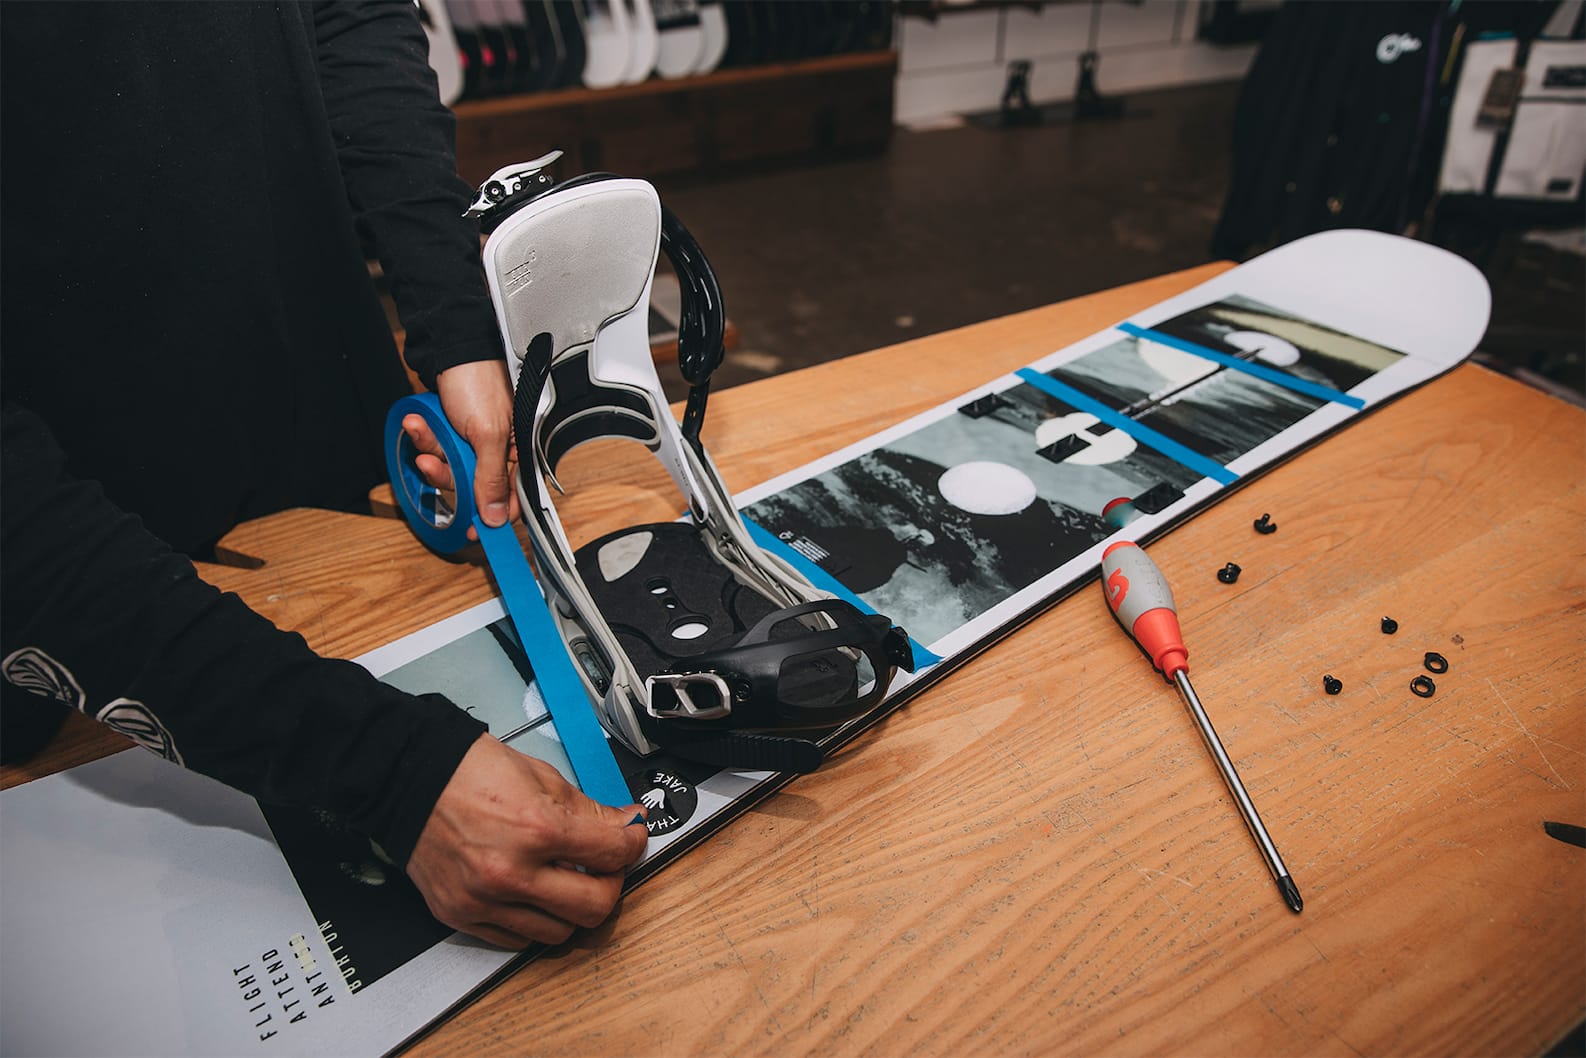 A Beginner's Guide on How to Set up a Snowboard